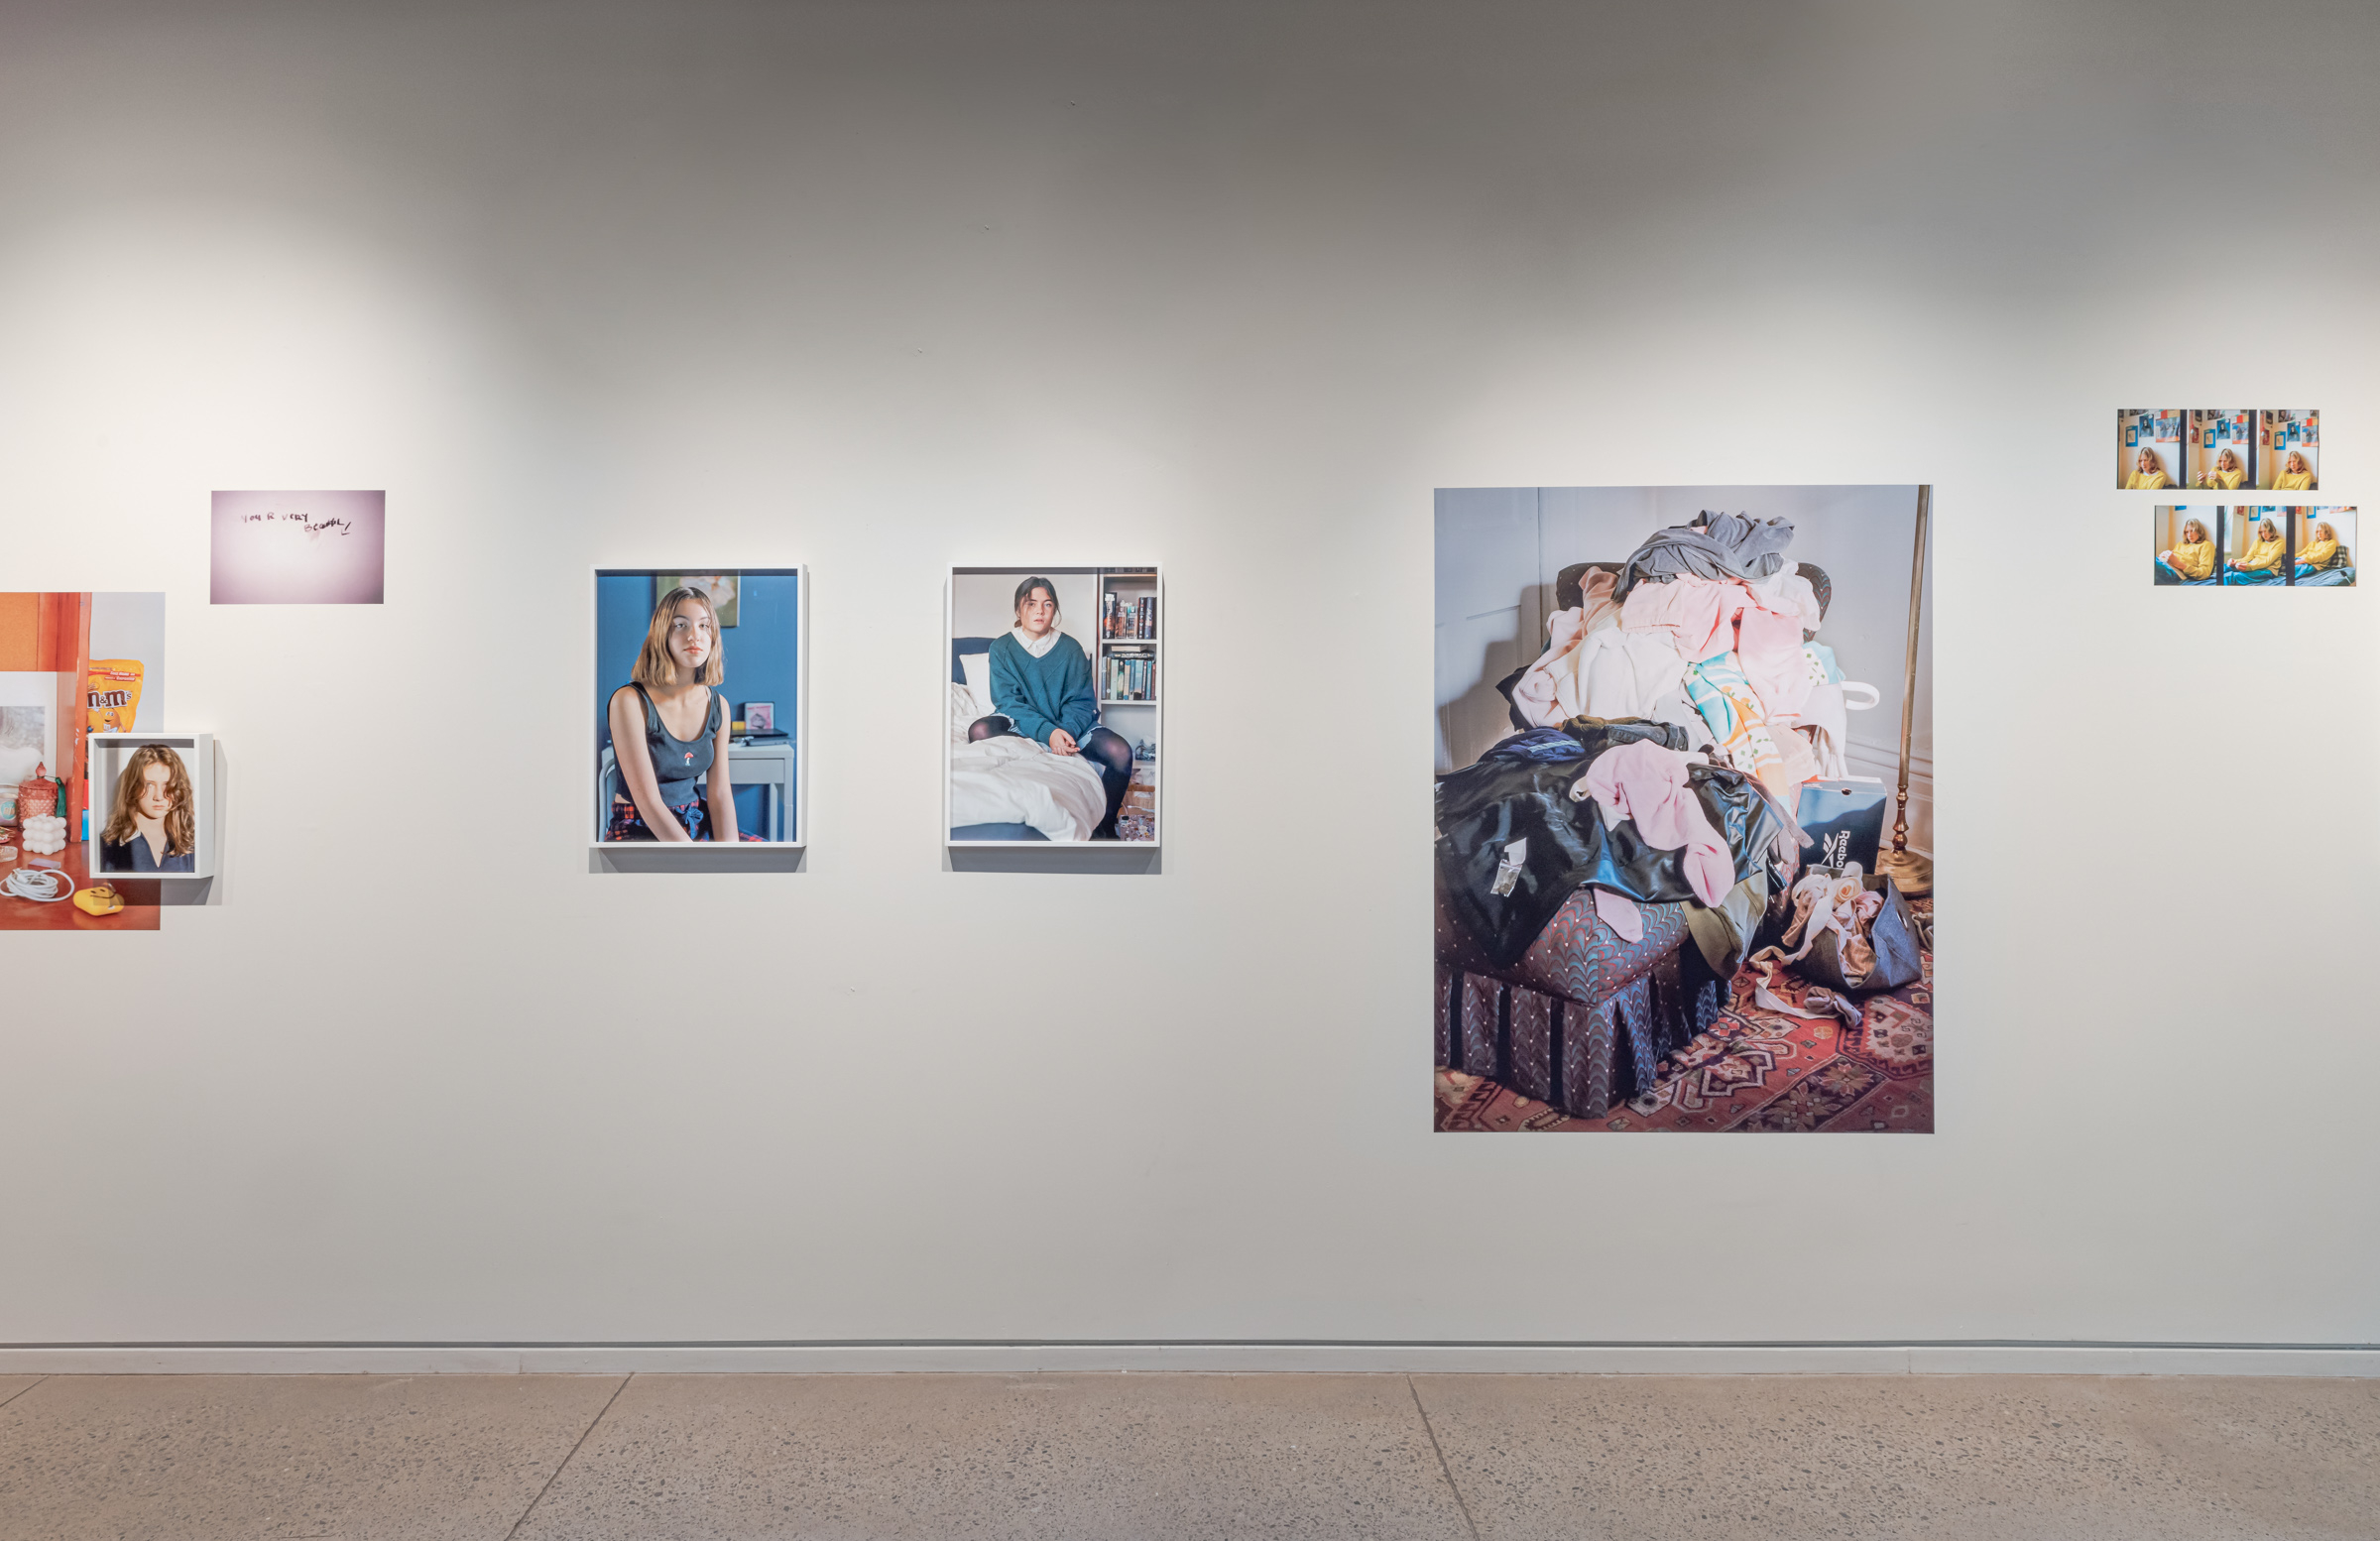     Anne Marie Cloutier, Teen Spirit, installation view, Alliance Française Gallery, 2022. Courtesy of the artist and CONTACT. Photo: Toni Hafkenscheid

